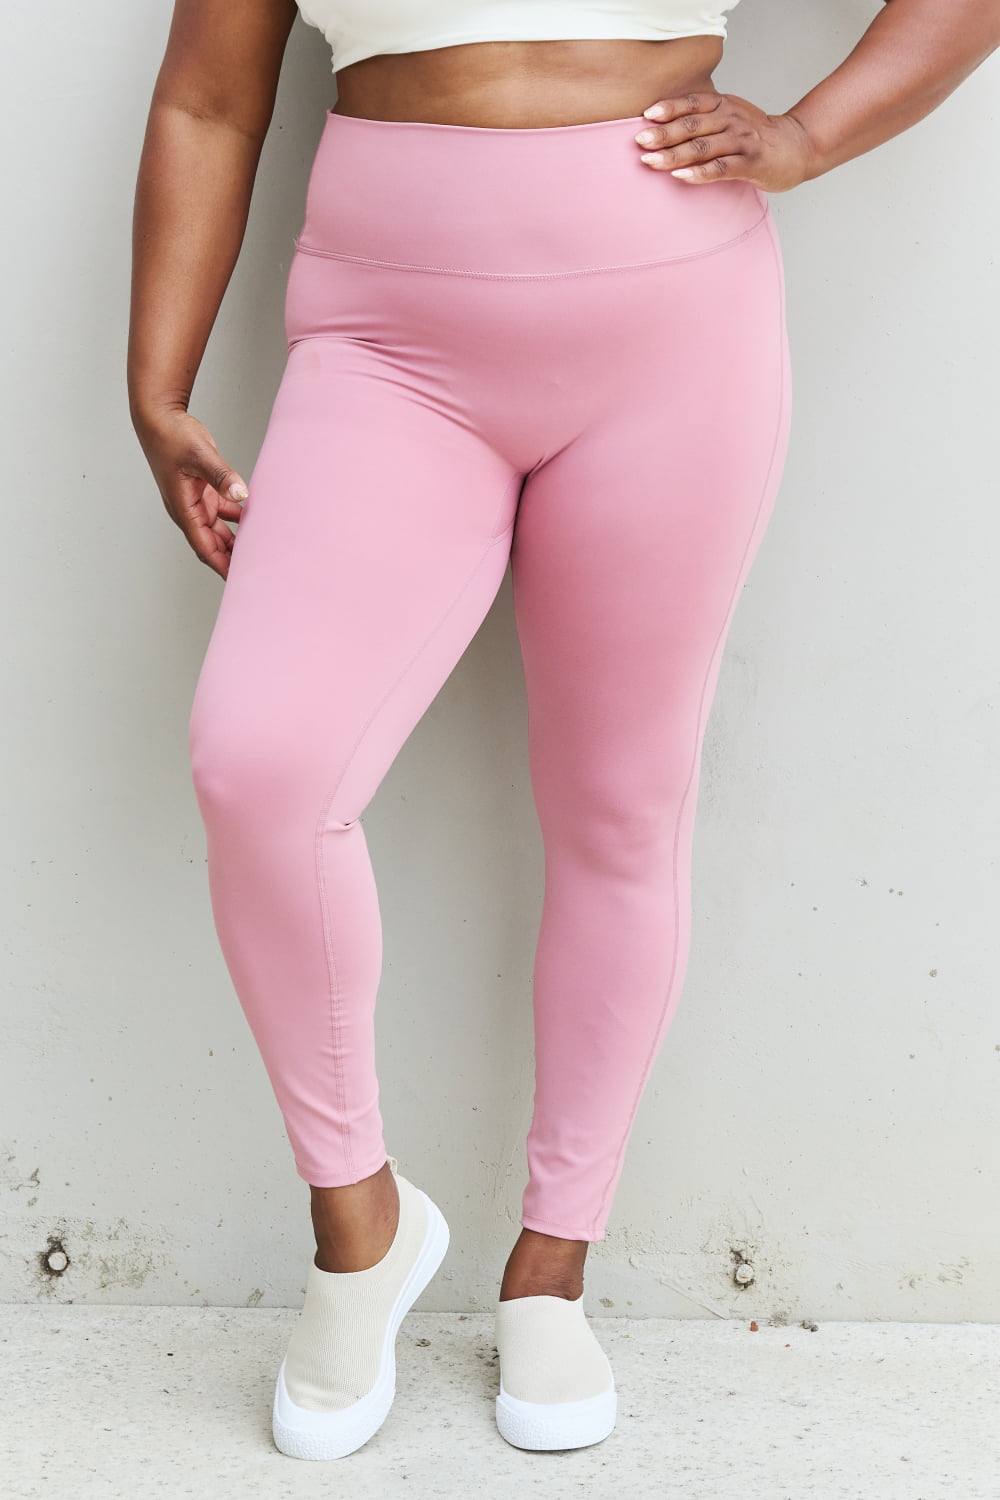 Fit For You Full Size High Waist Active Leggings in Light Rose - Women’s Clothing & Accessories - Activewear - 7 - 2024